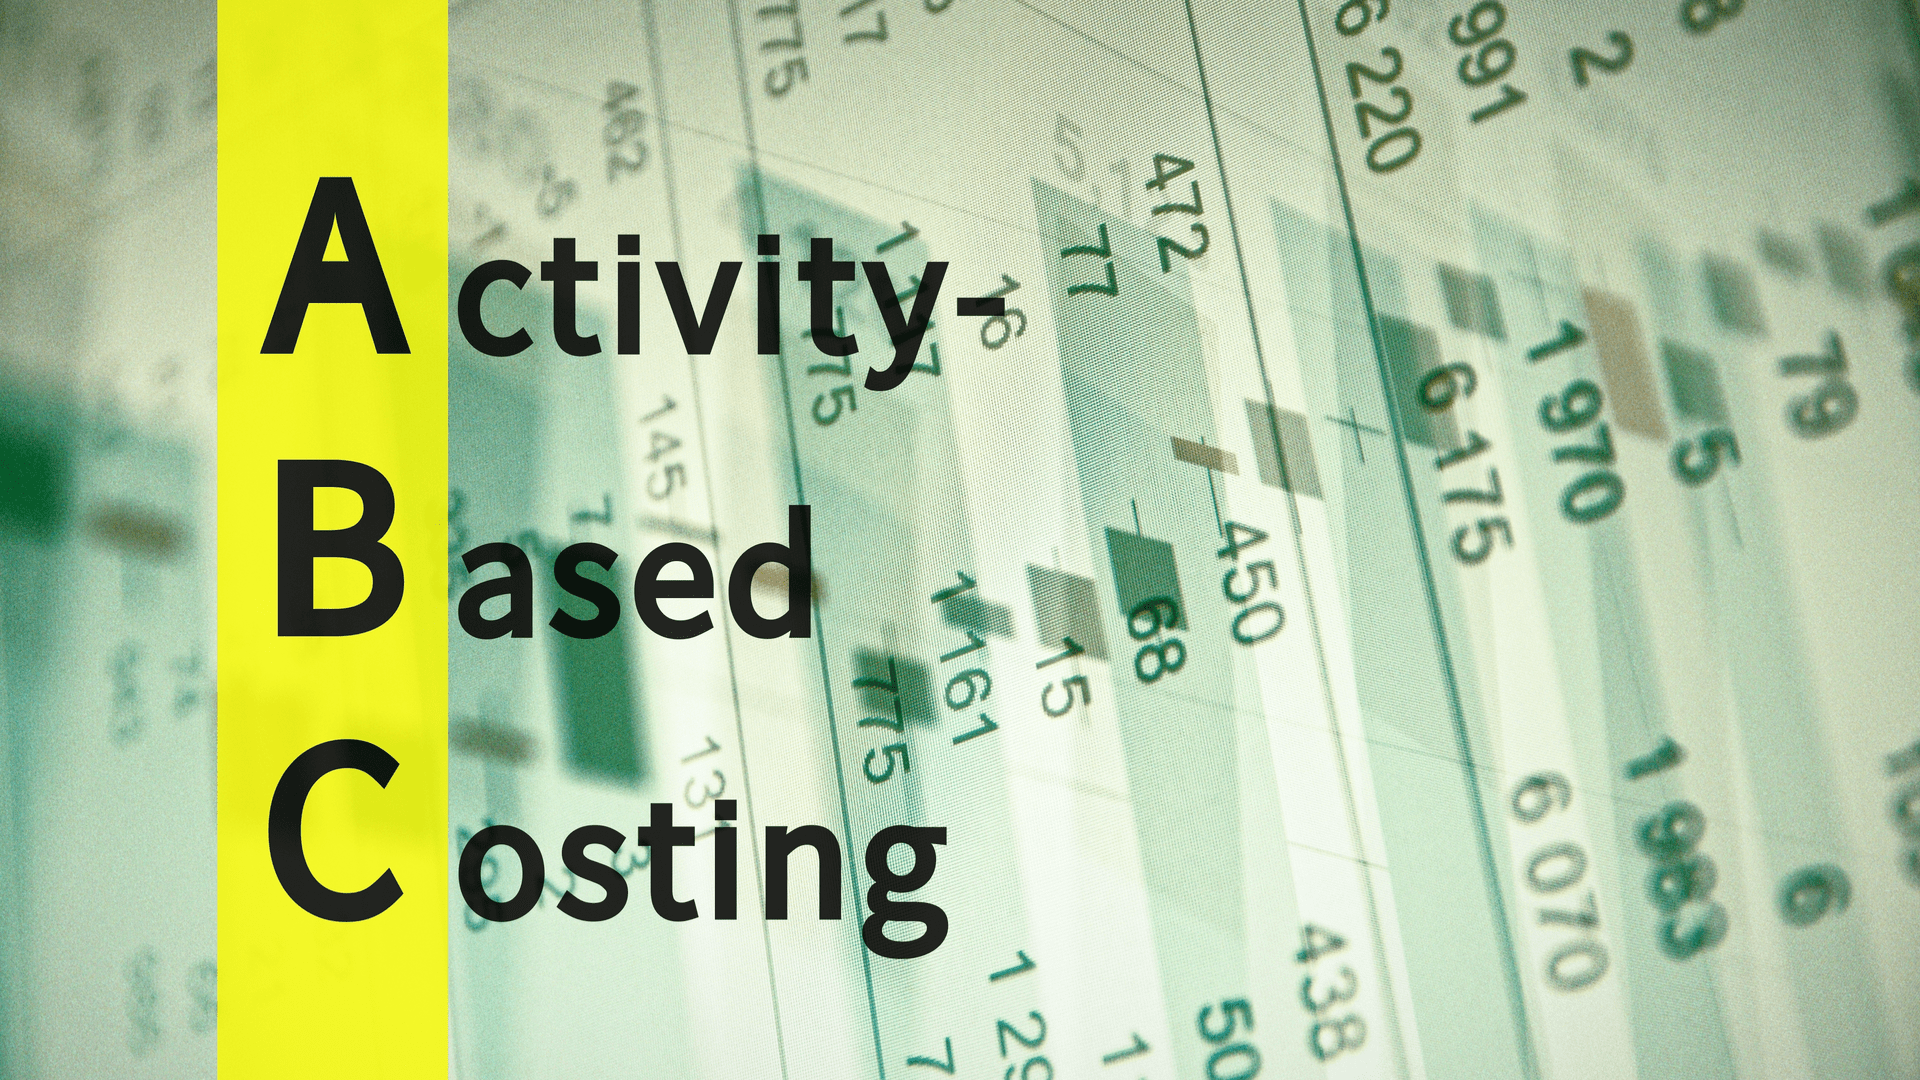 What Is Activity Based Costing, And Why Do I Need It?